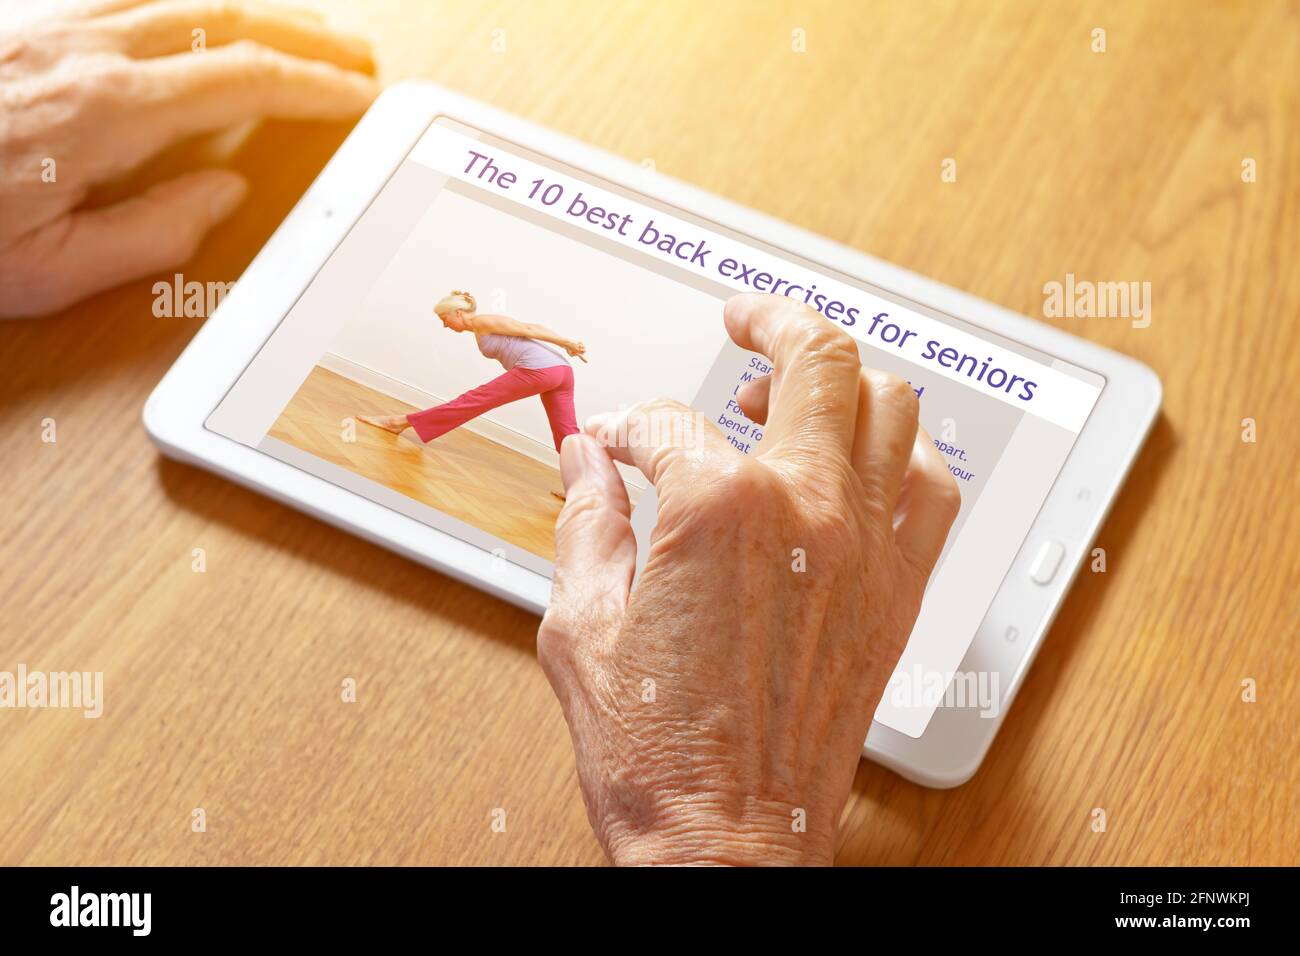 Home fitness concept: hands of a senior woman zooming in on instructions for back exercises on a tablet pc. Stock Photo